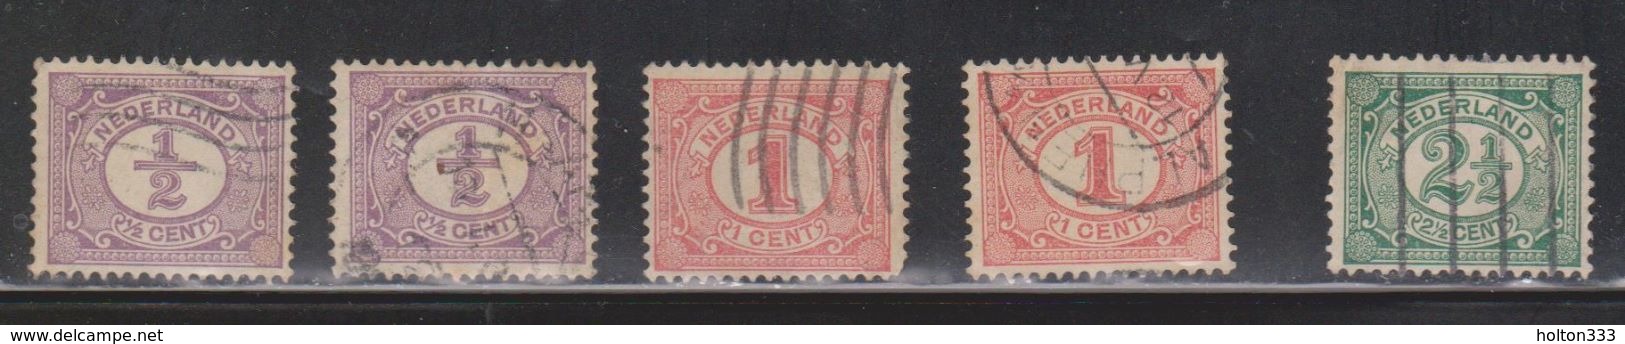 NETHERLANDS Scott # 55-6, 60 Used - Used Stamps